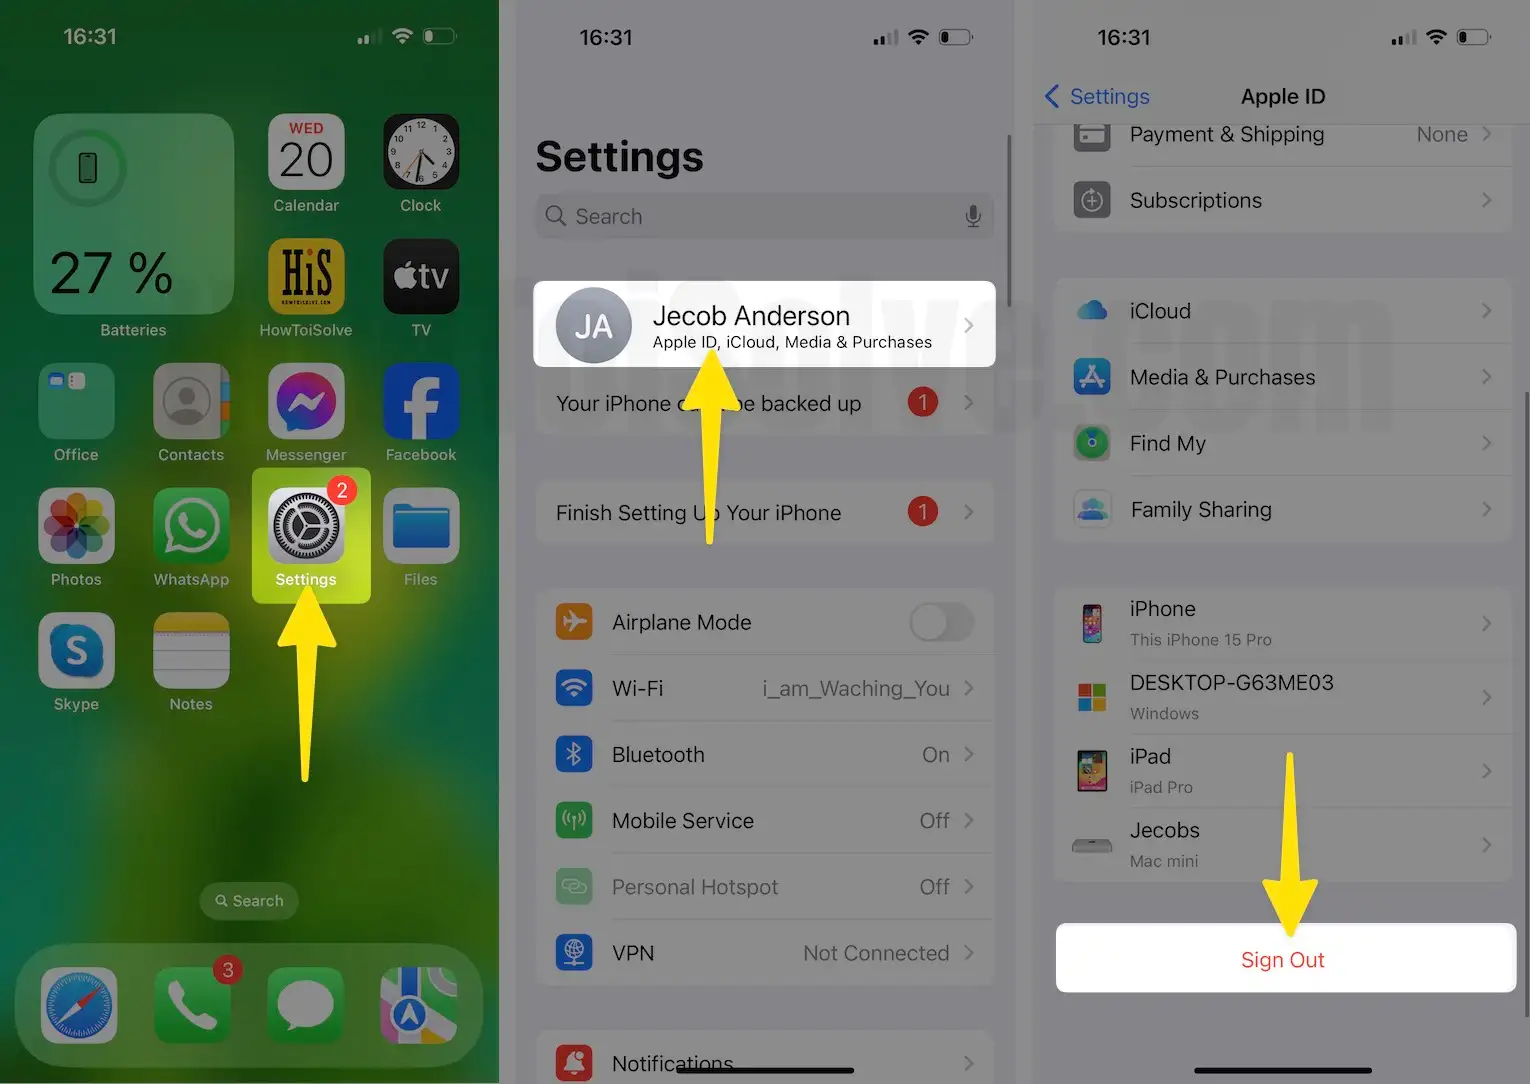 Launch the settings app tap on apple id profile name then select sign out on iPhone